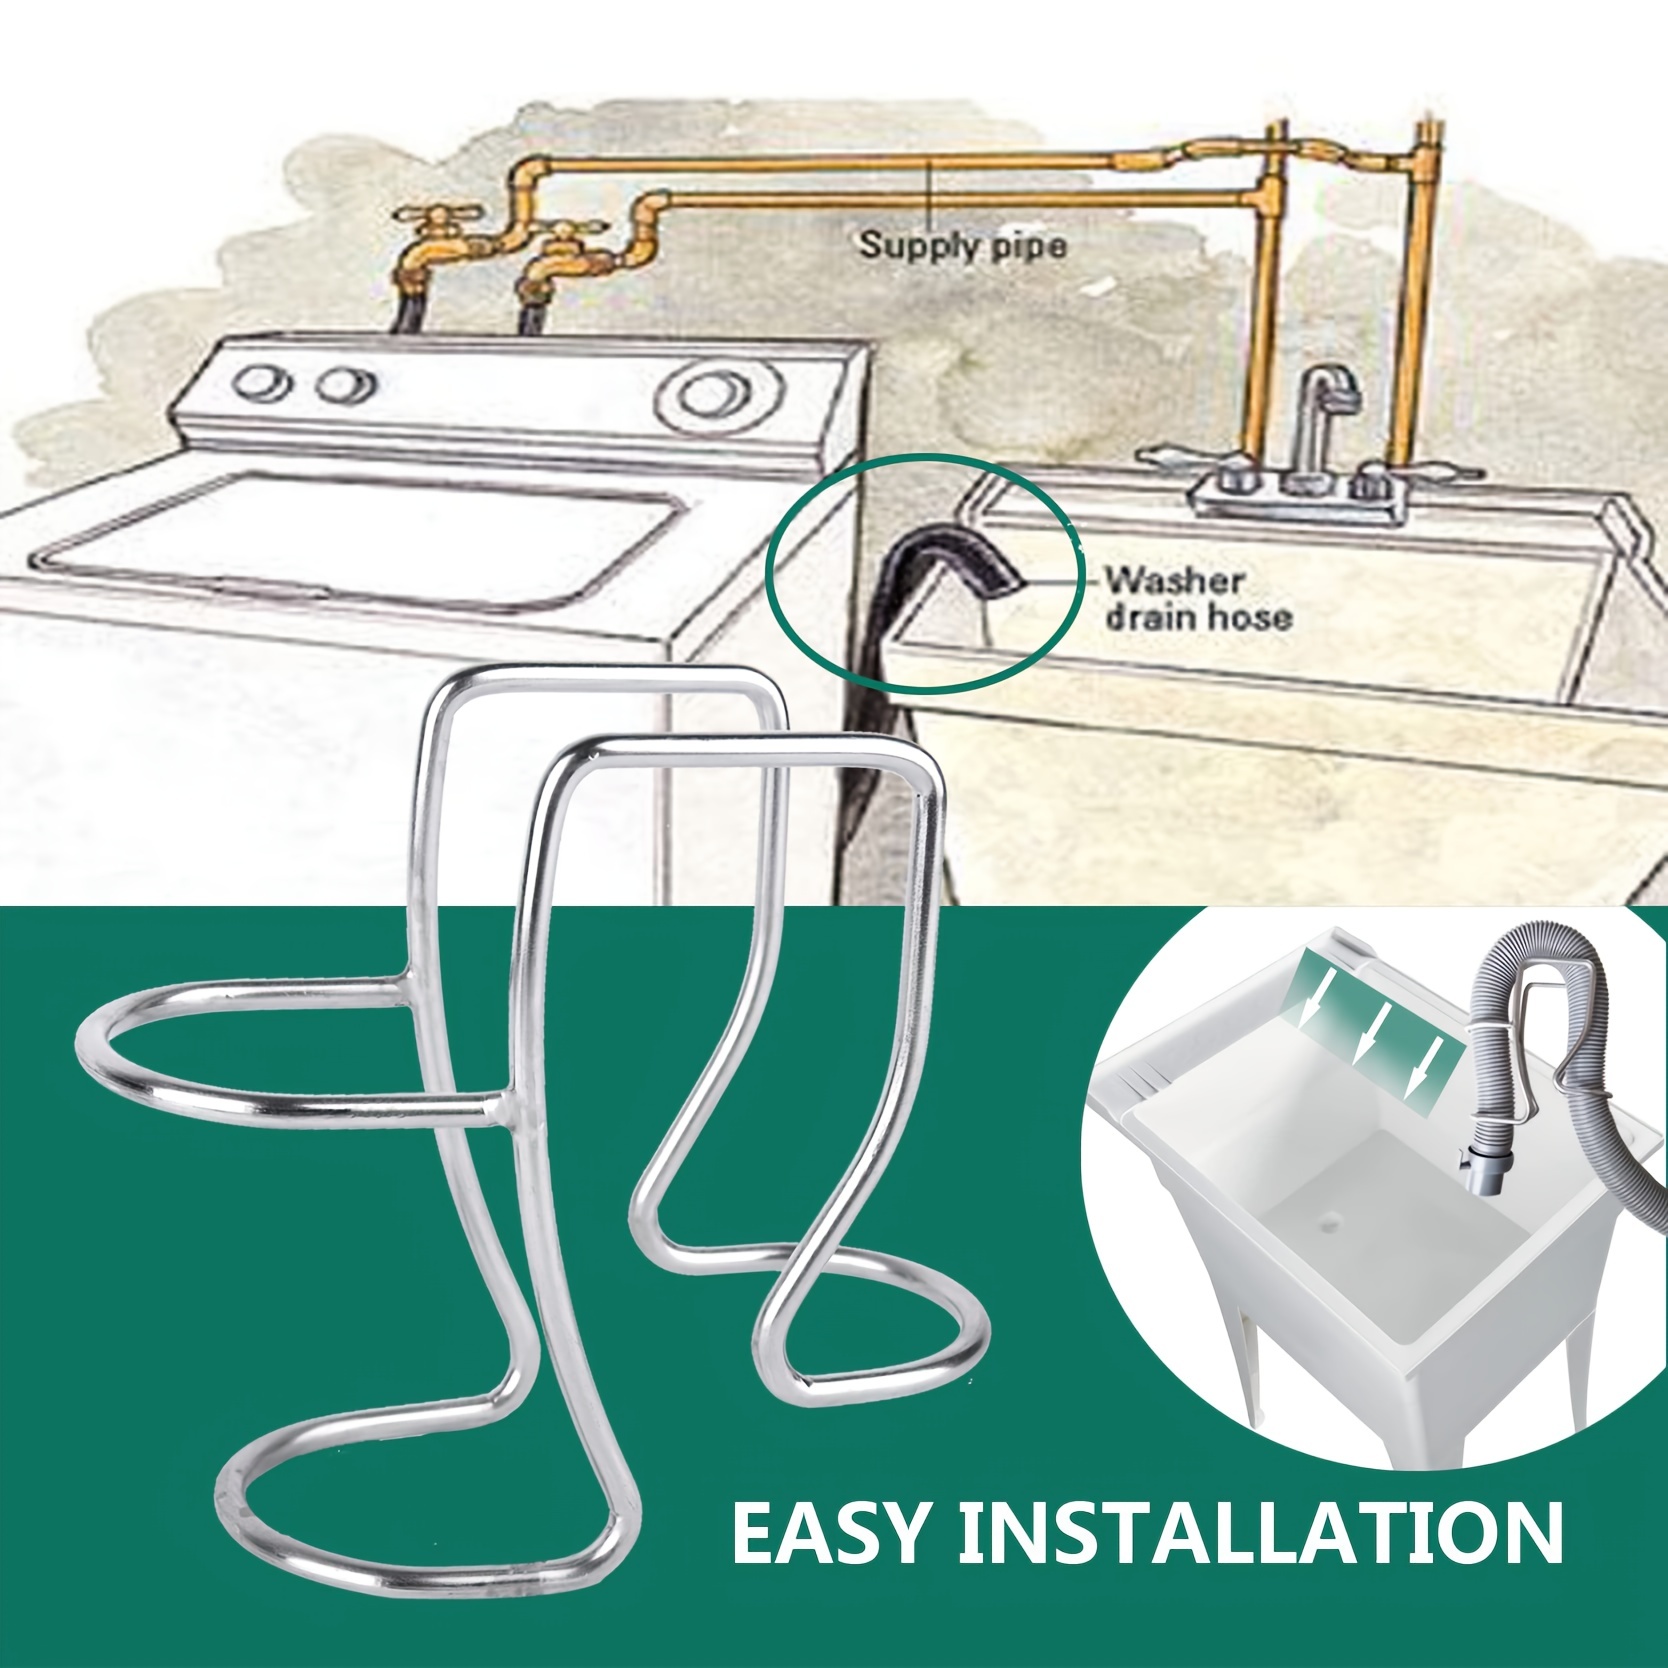 Dishwasher Mounting Bracket: Ultimate Guide to Easy Installations